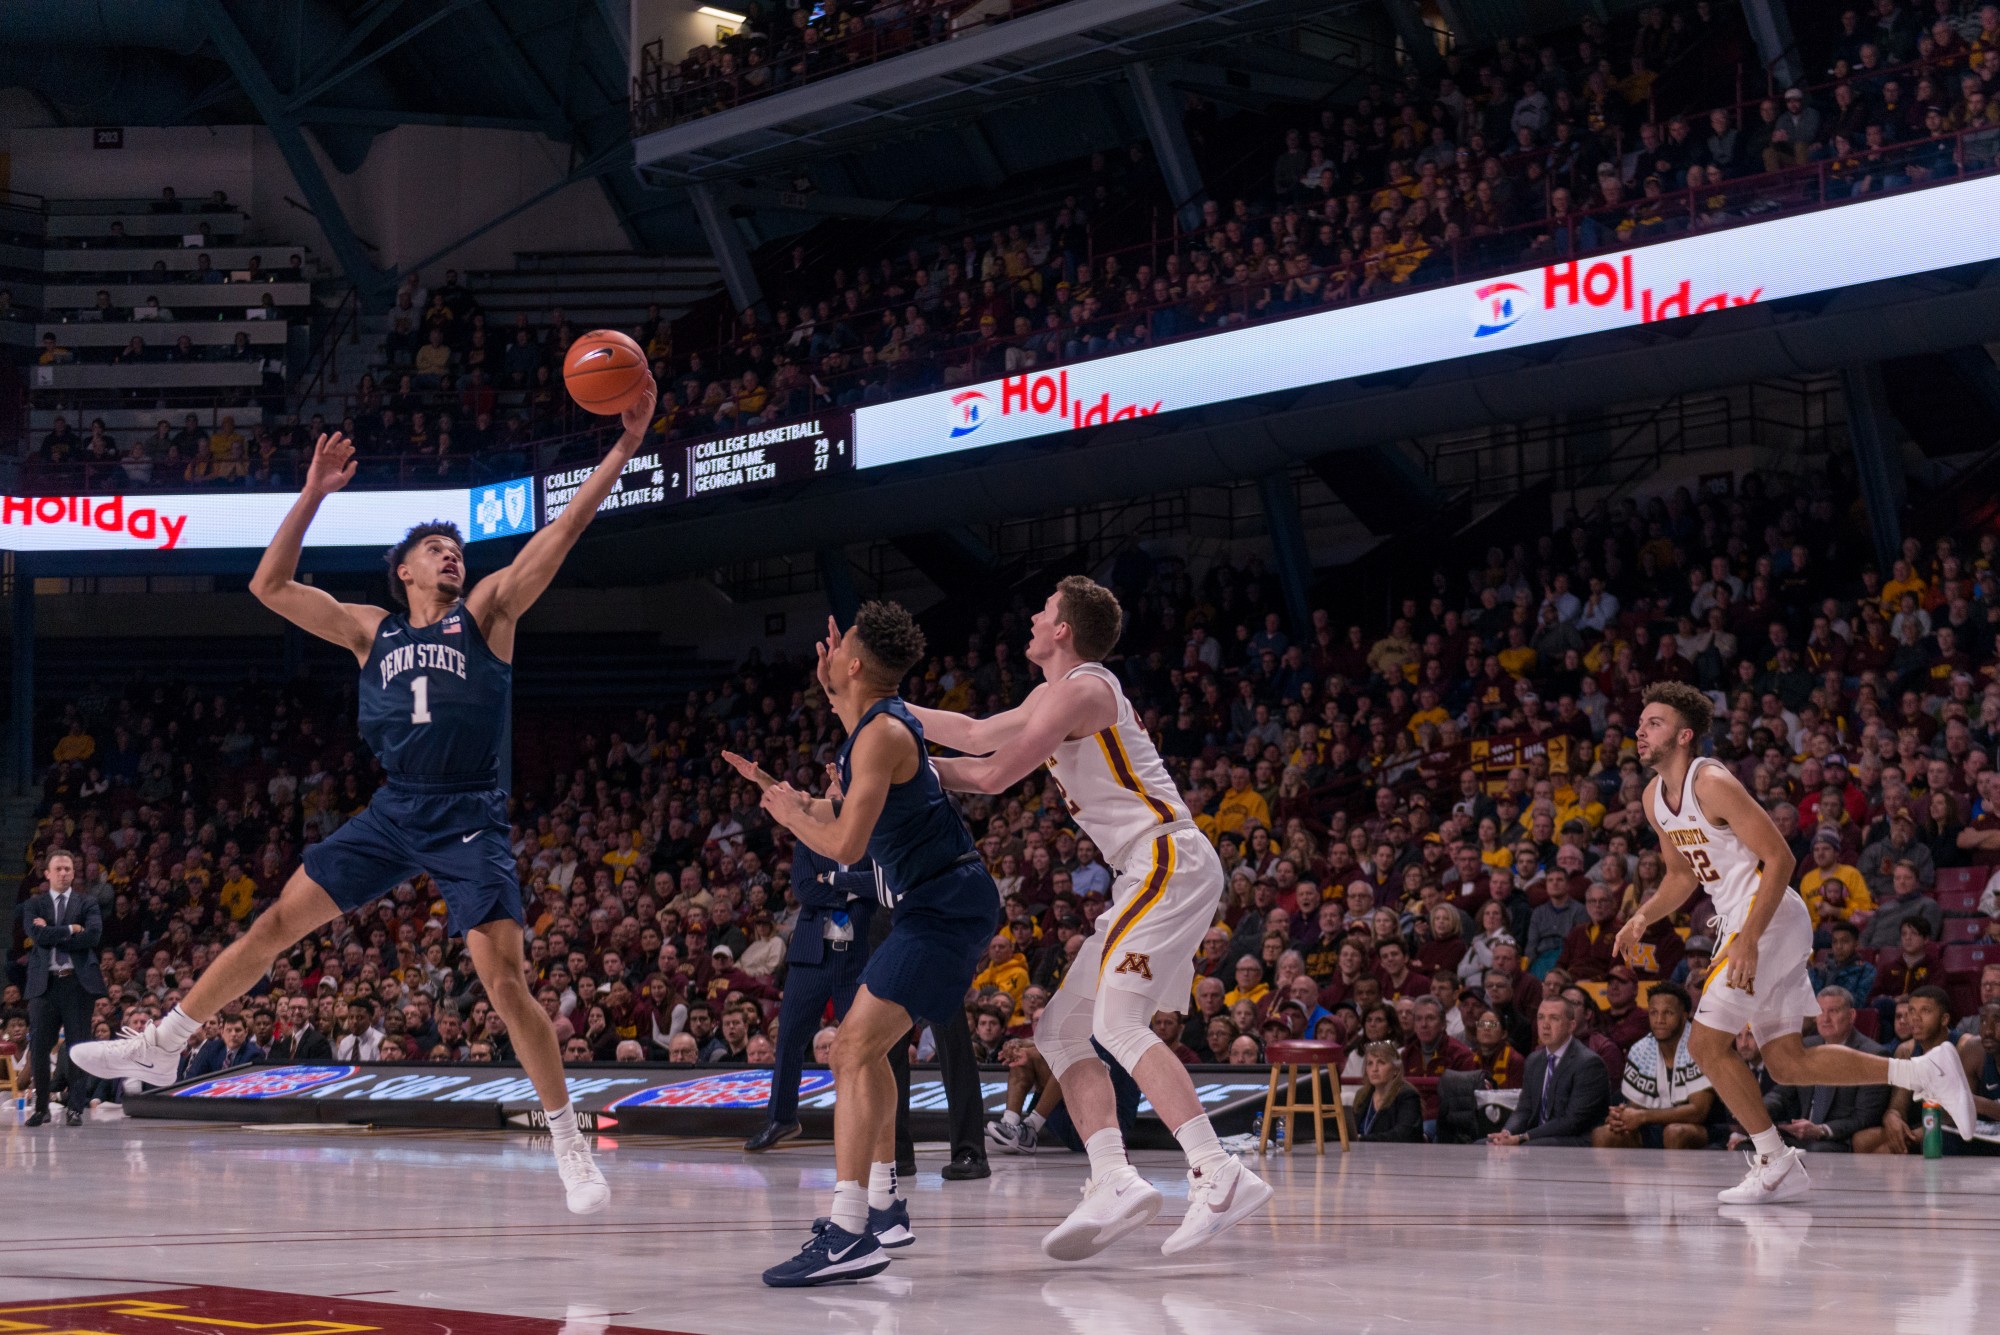 A defender intercepts an off target pass at Williams Arena on Wednesday, Jan. 15.  Minnesota defeated the Penn State Nittany Lions 75-69. (Kamaan Richards / Minnesota Daily)